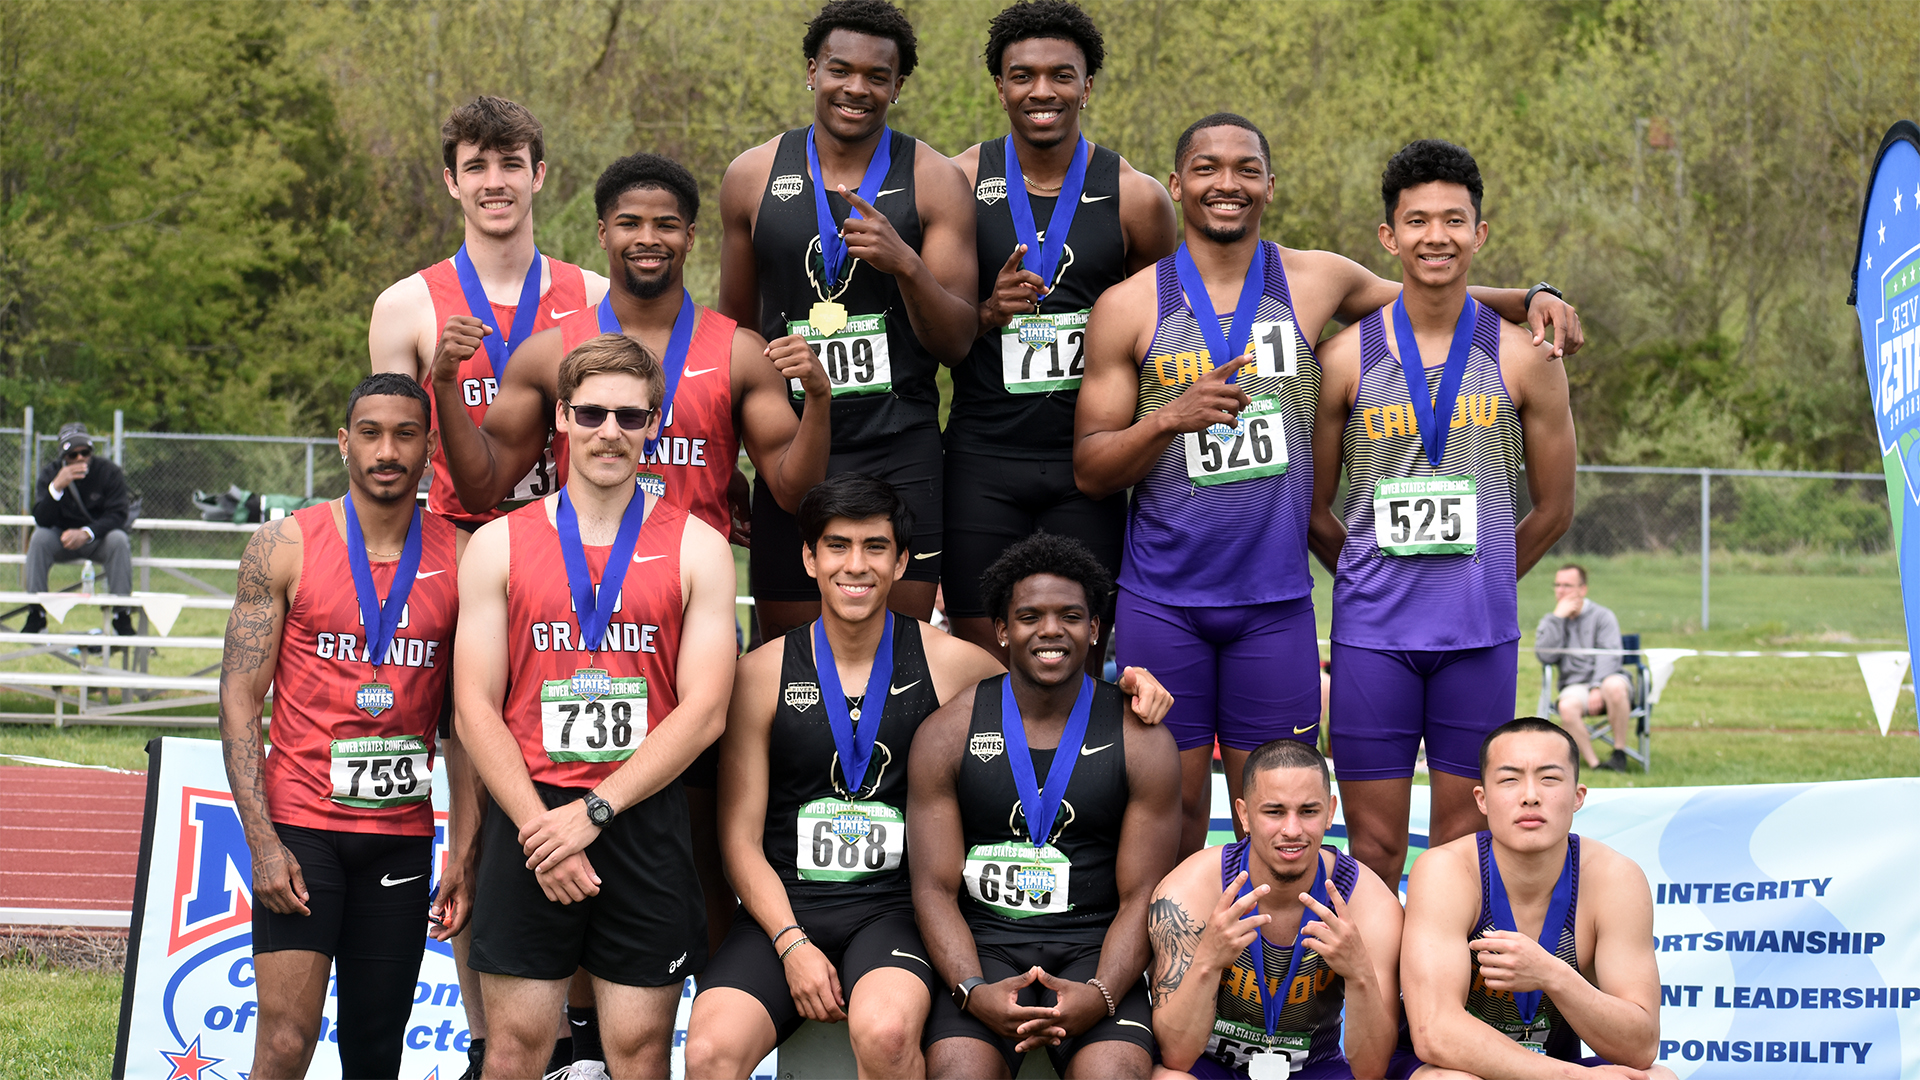 The 4x100 relay team (from top right) of Tyhir Royster, Shajit Pokwal, Quay Canton and Bryan Pan brought home second place. Photo courtesy of RSC Sports Information.